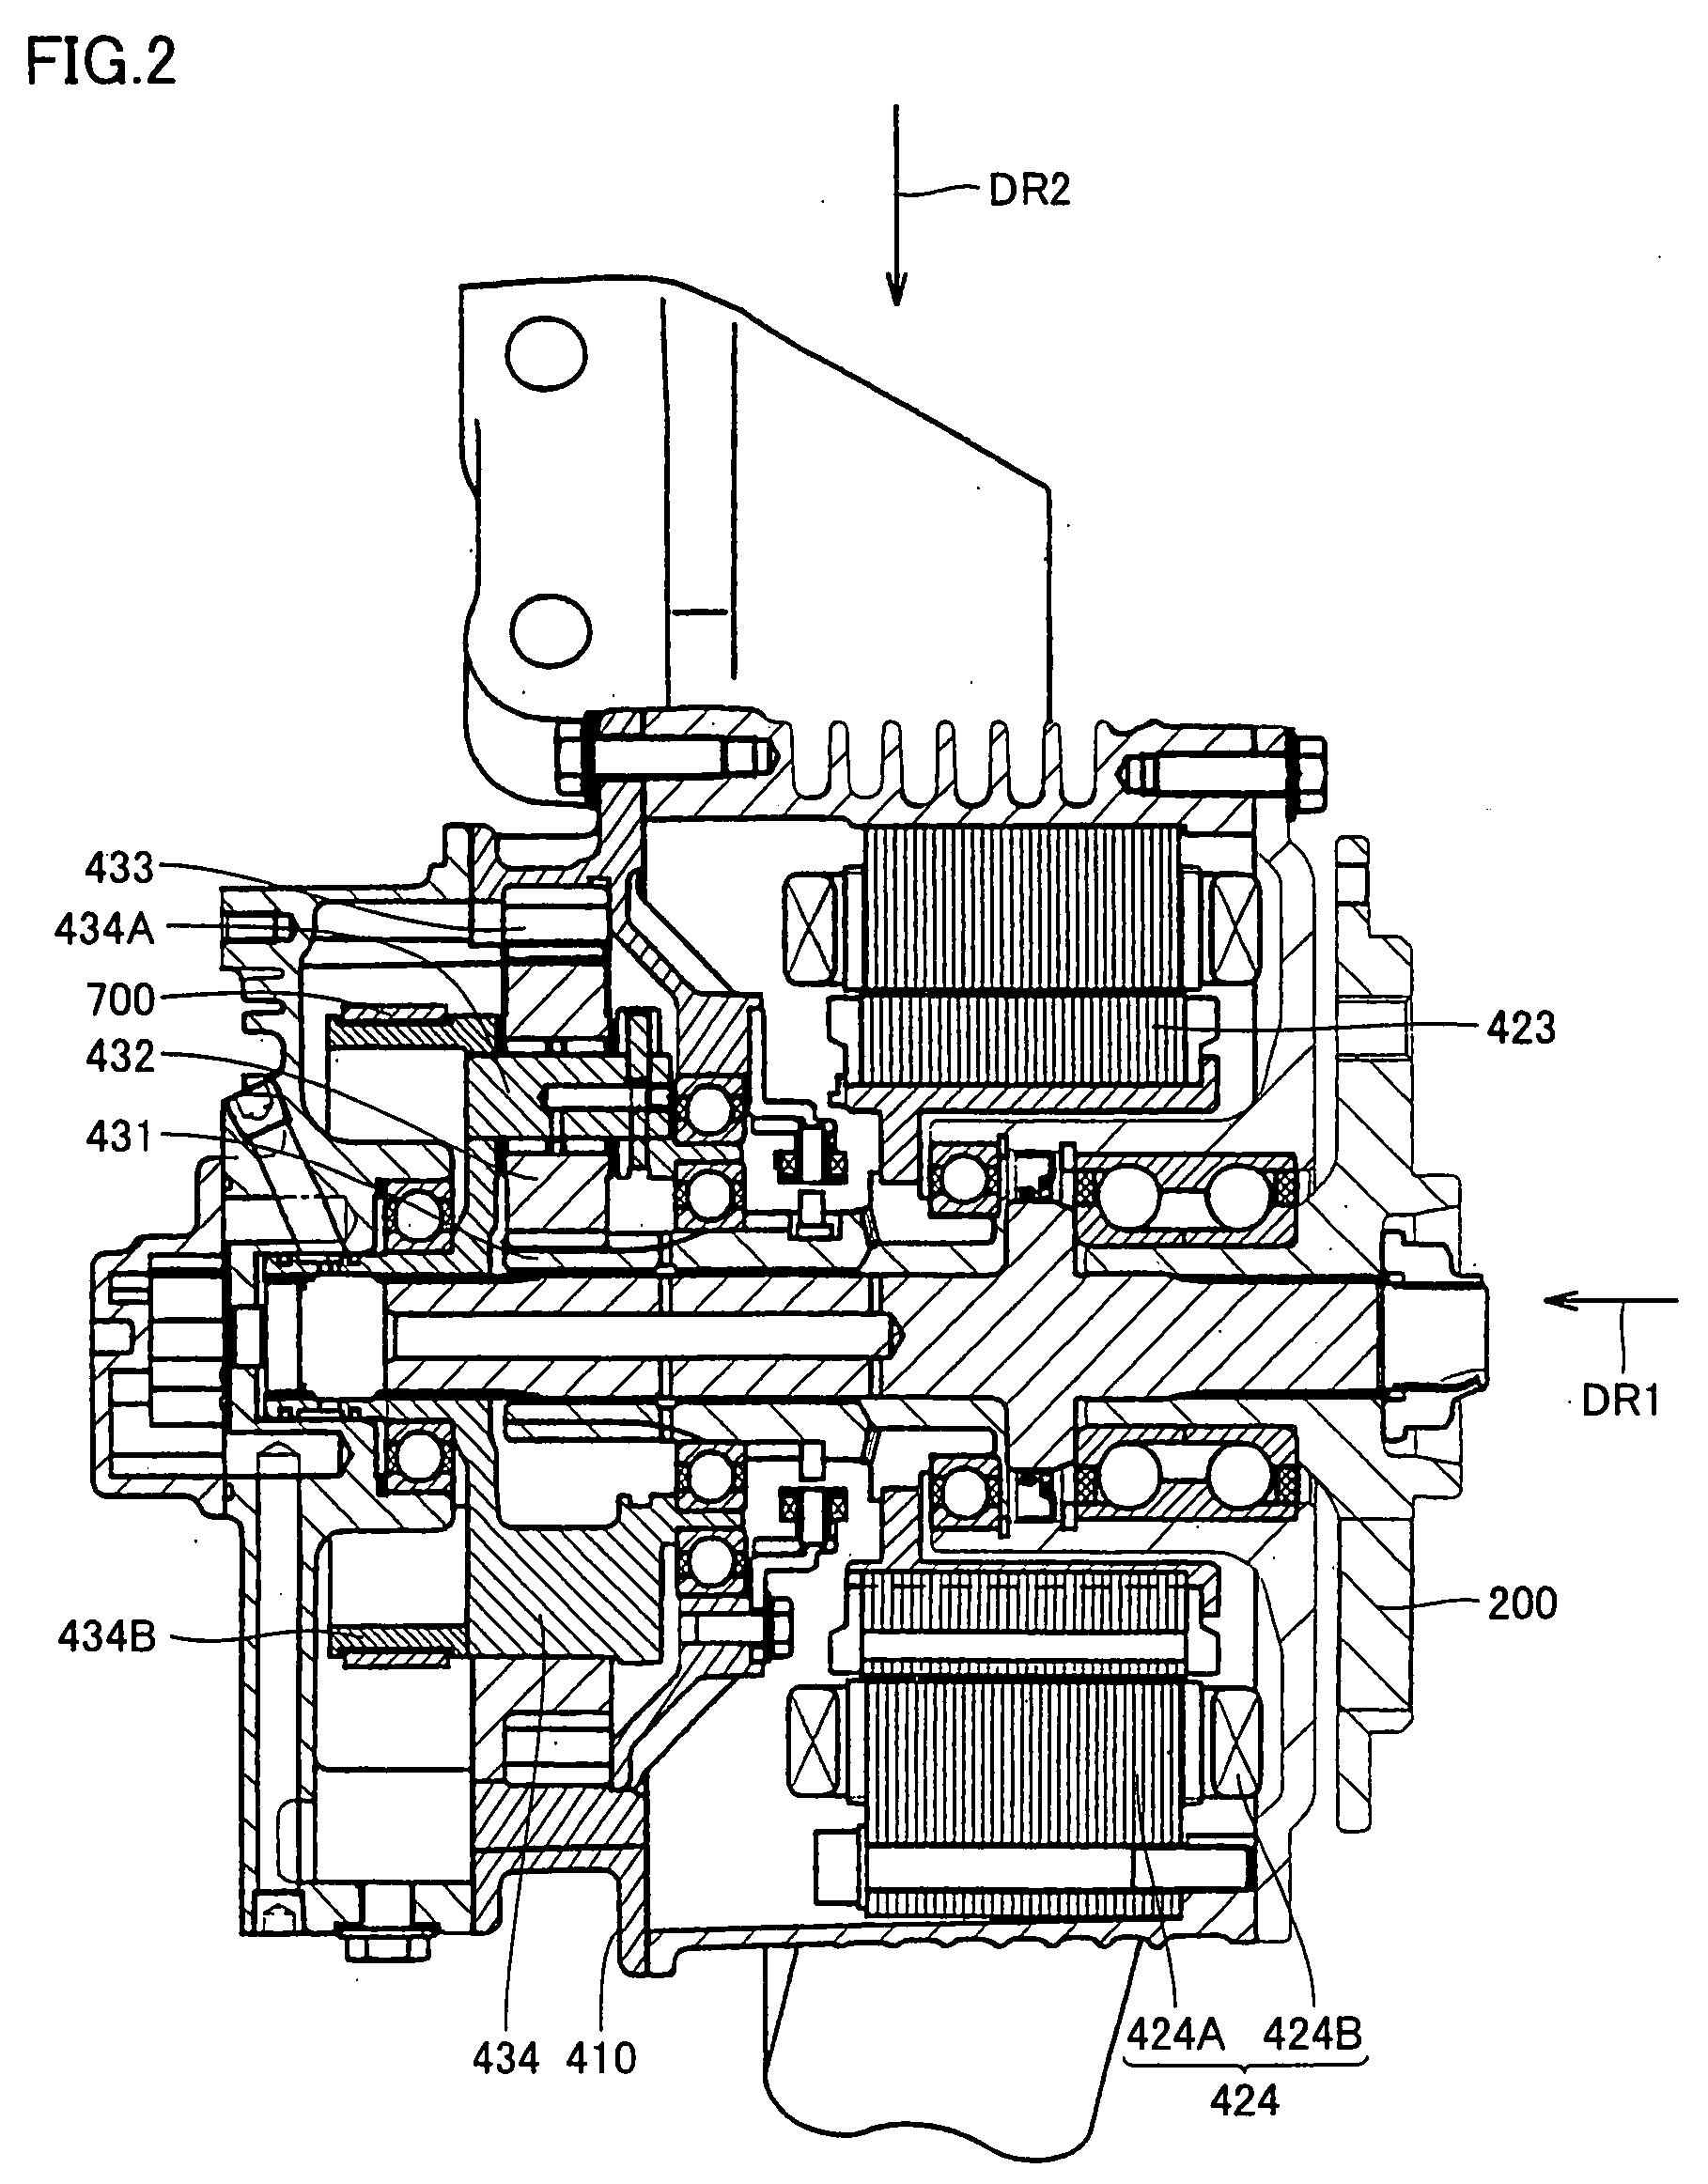 Electrically Driven Wheel and Vehicle